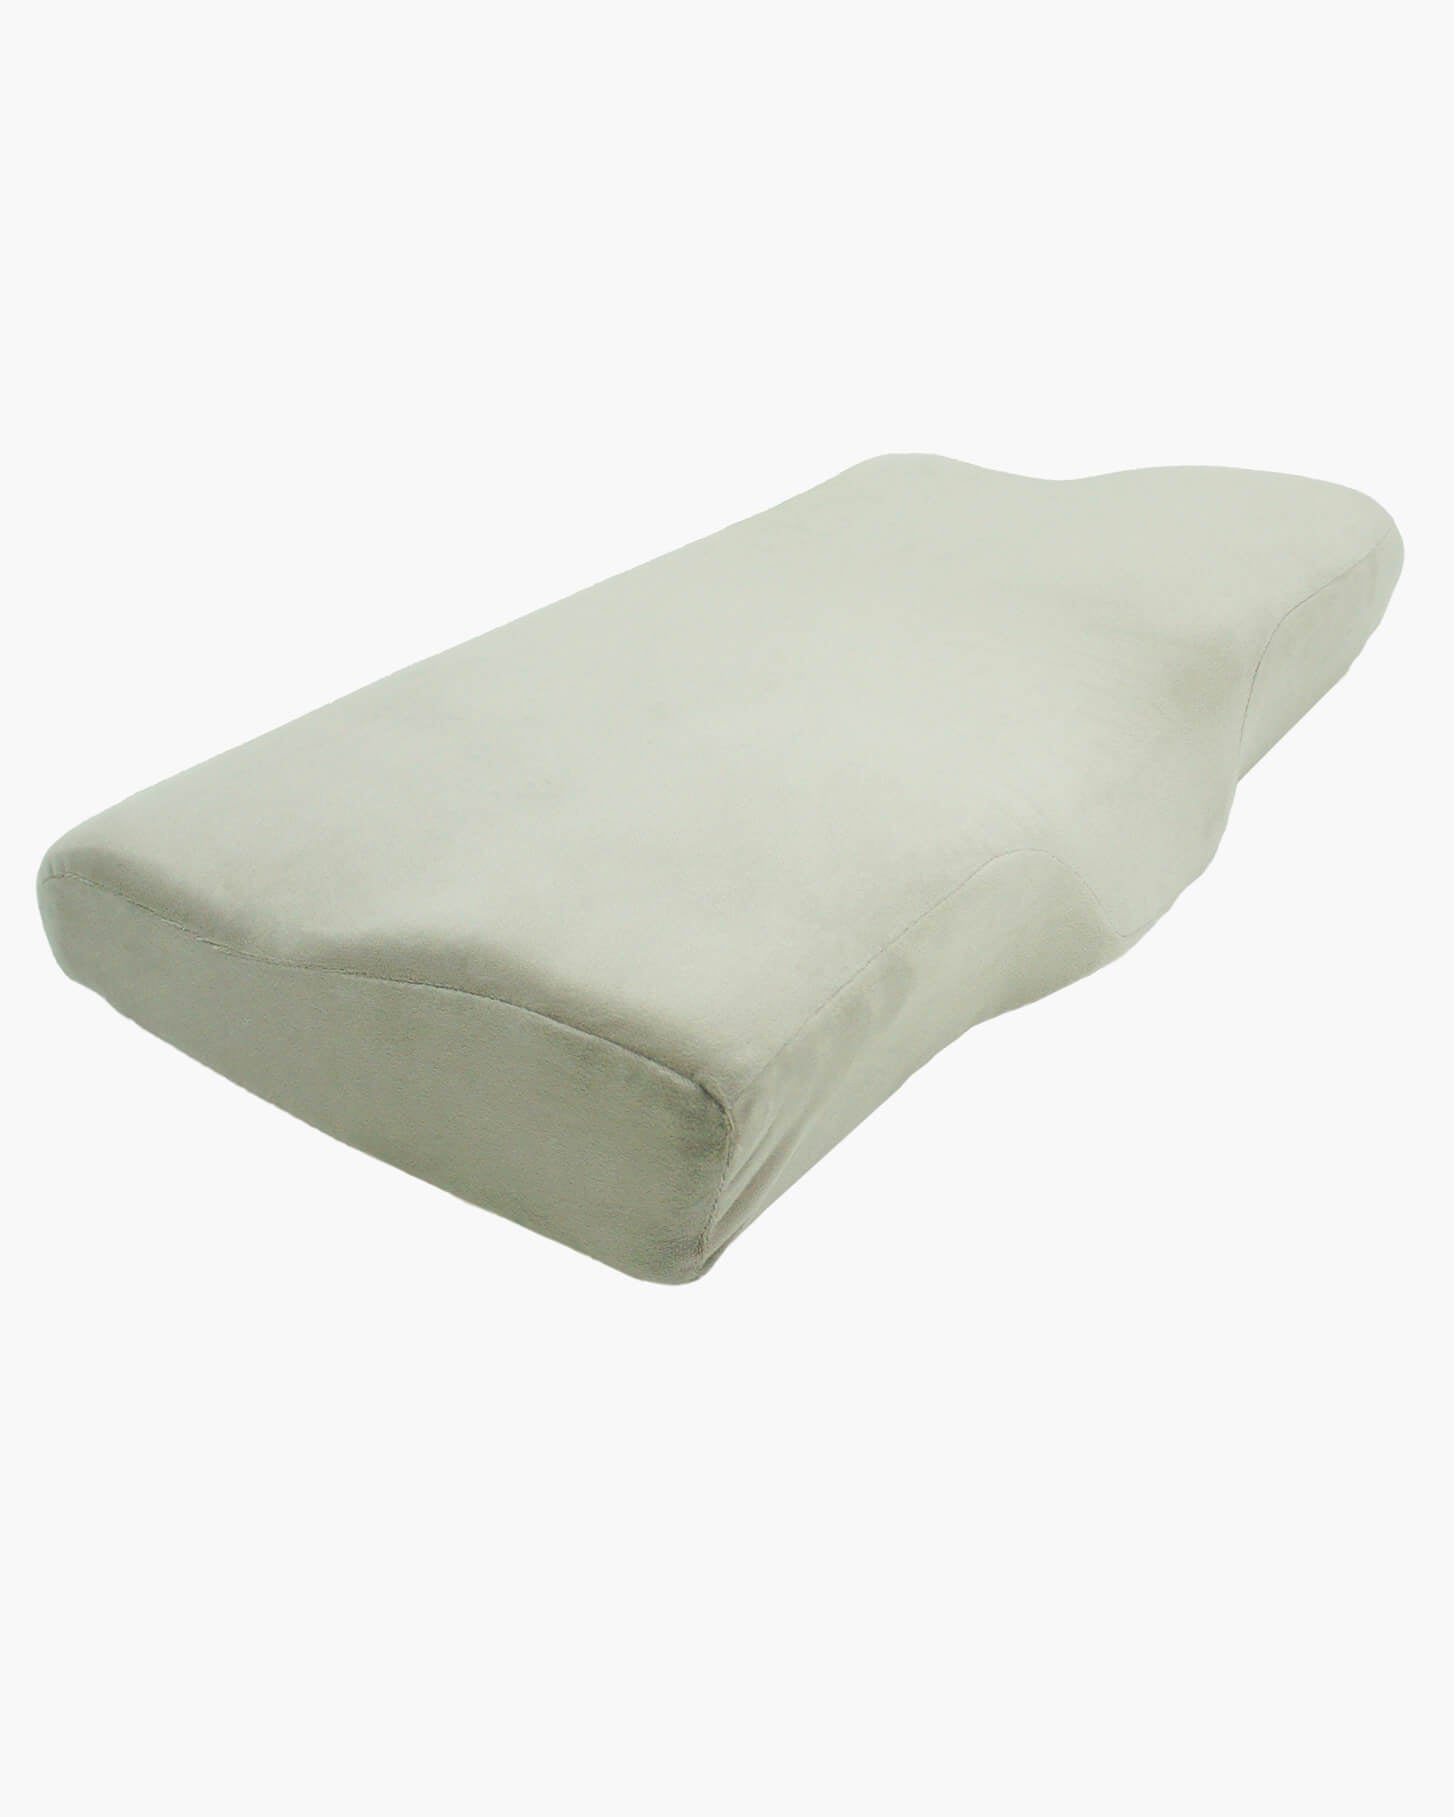 Ortho Care Cervical Neck Pillow